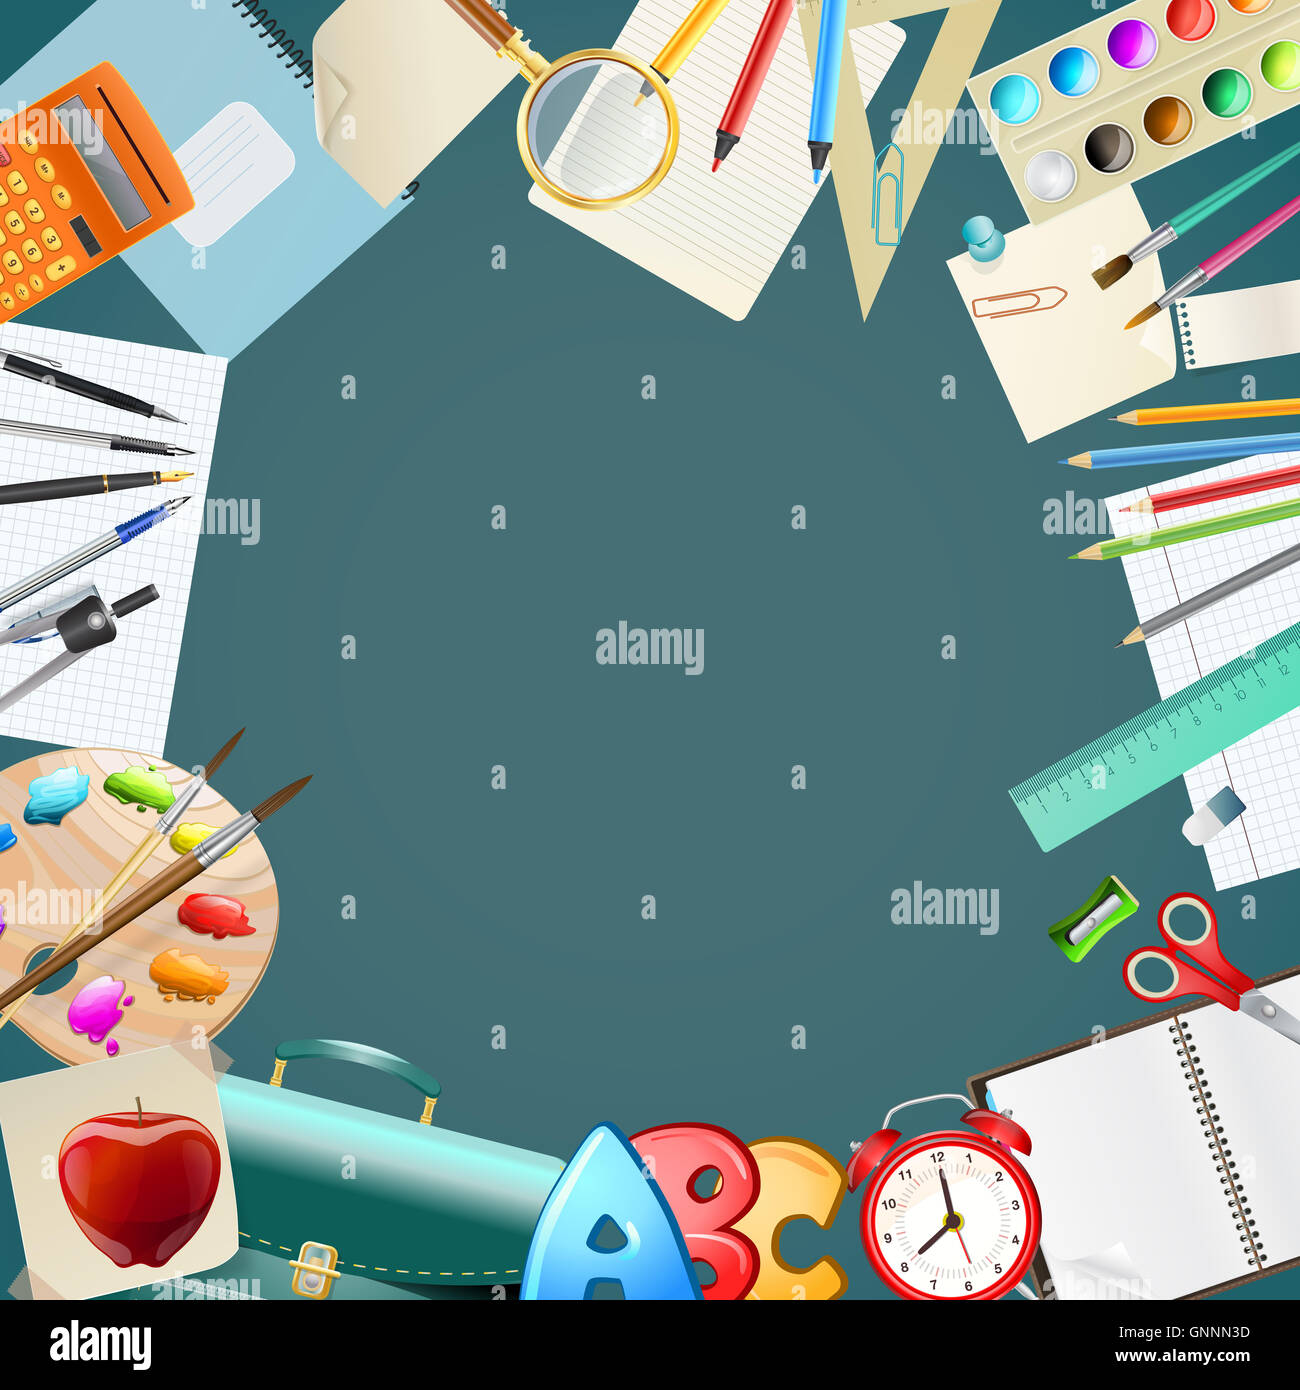 background with school items Stock Photo